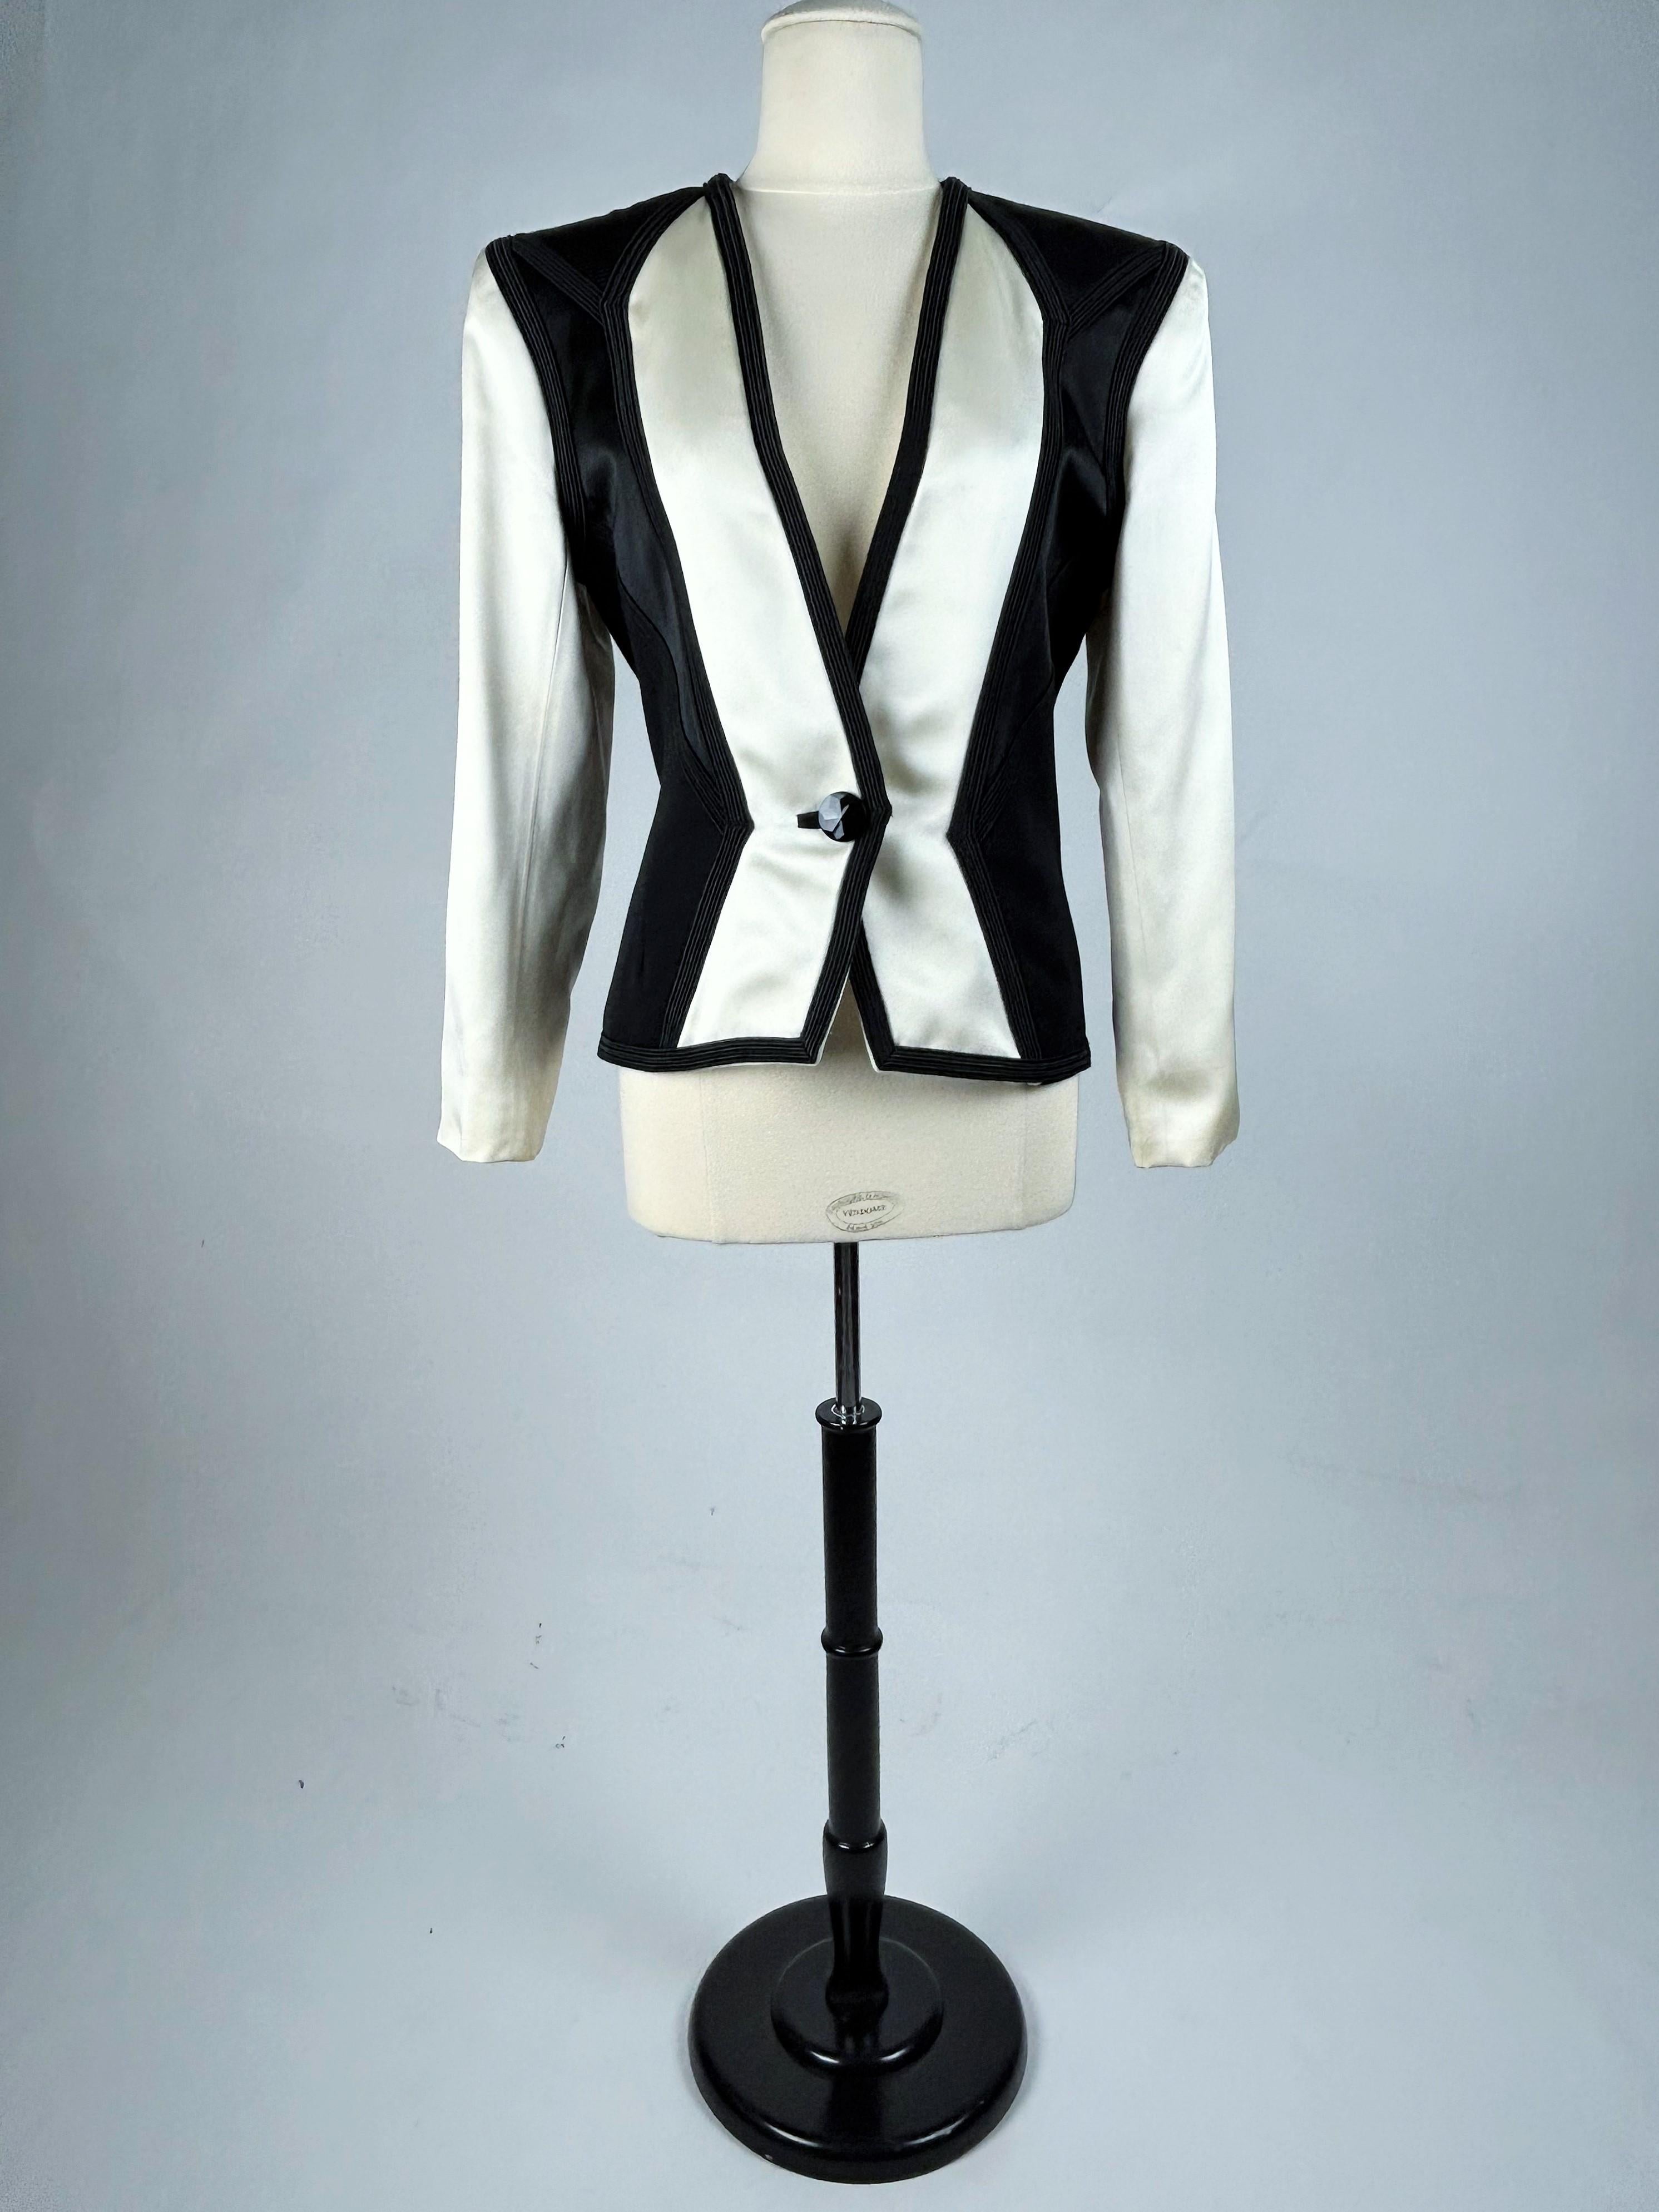 An Yves Saint Laurent Rive Gauche Jacket inspired by Picasso Circa 1989 3